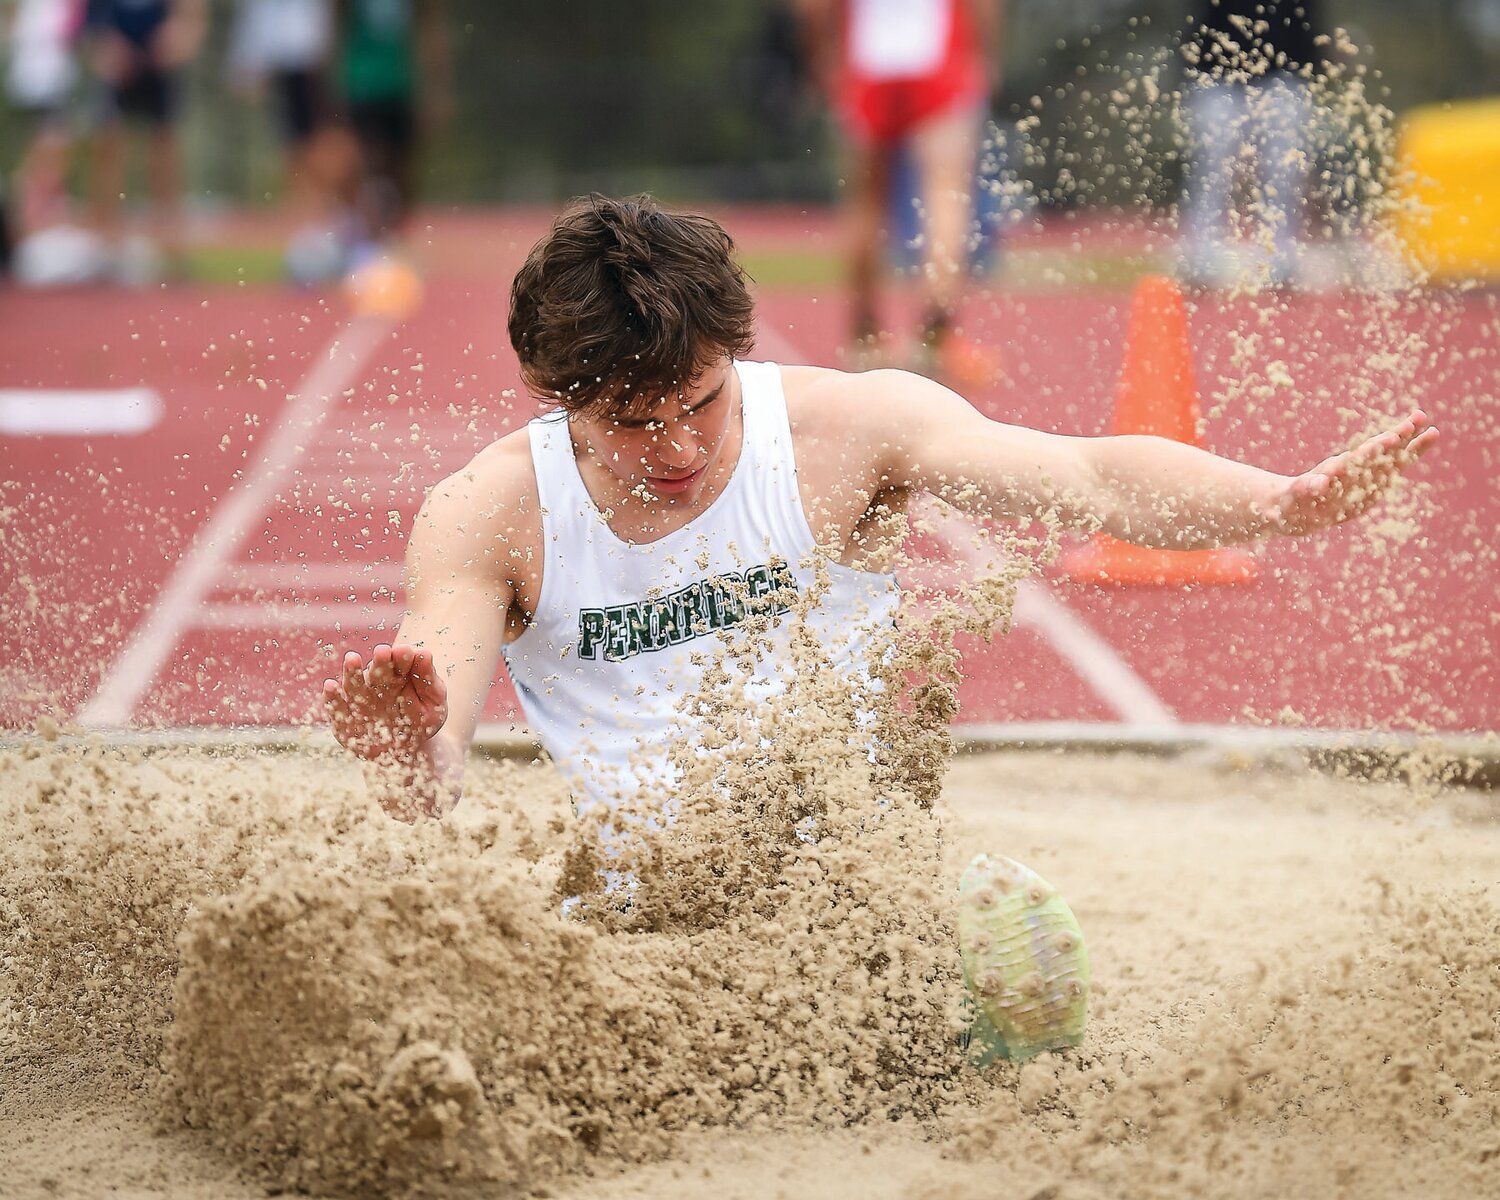 Pennridge’s Chase Marshall cleared 20 feet, 9 inches while placing first in the long jump.